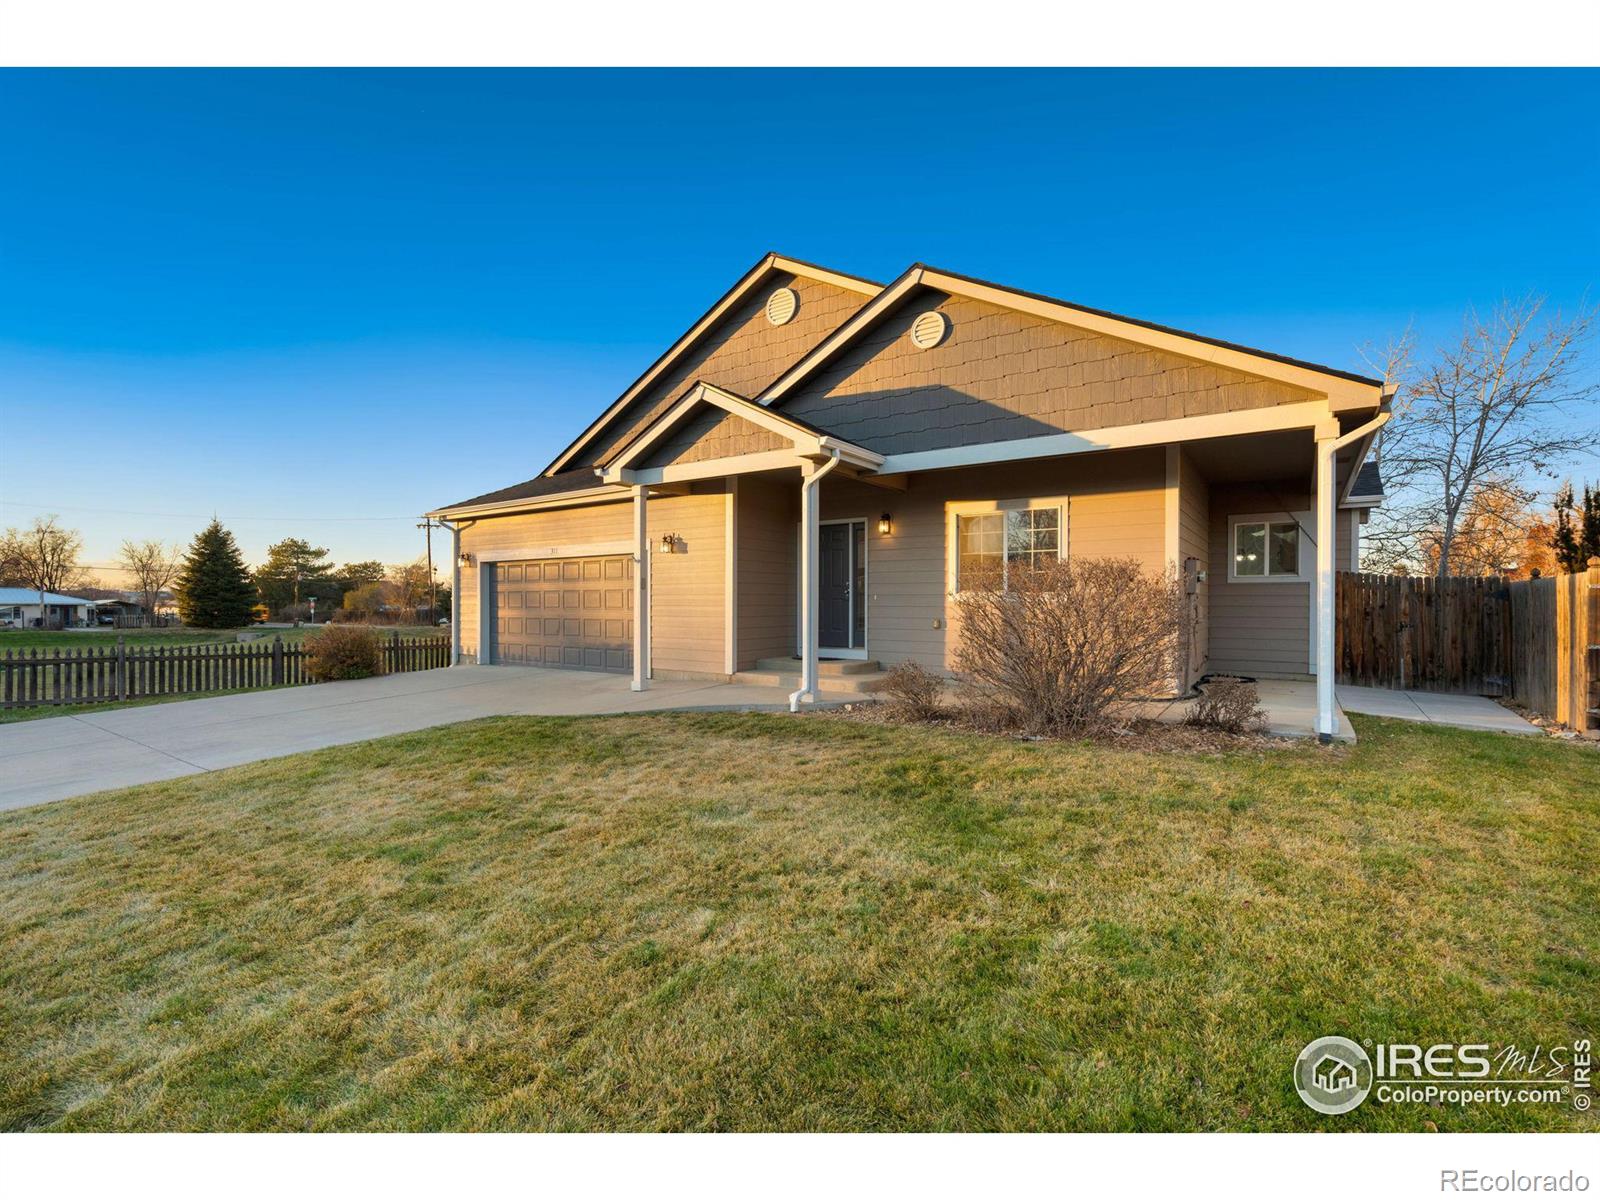 Report Image for 311  Brophy Court,Frederick, Colorado